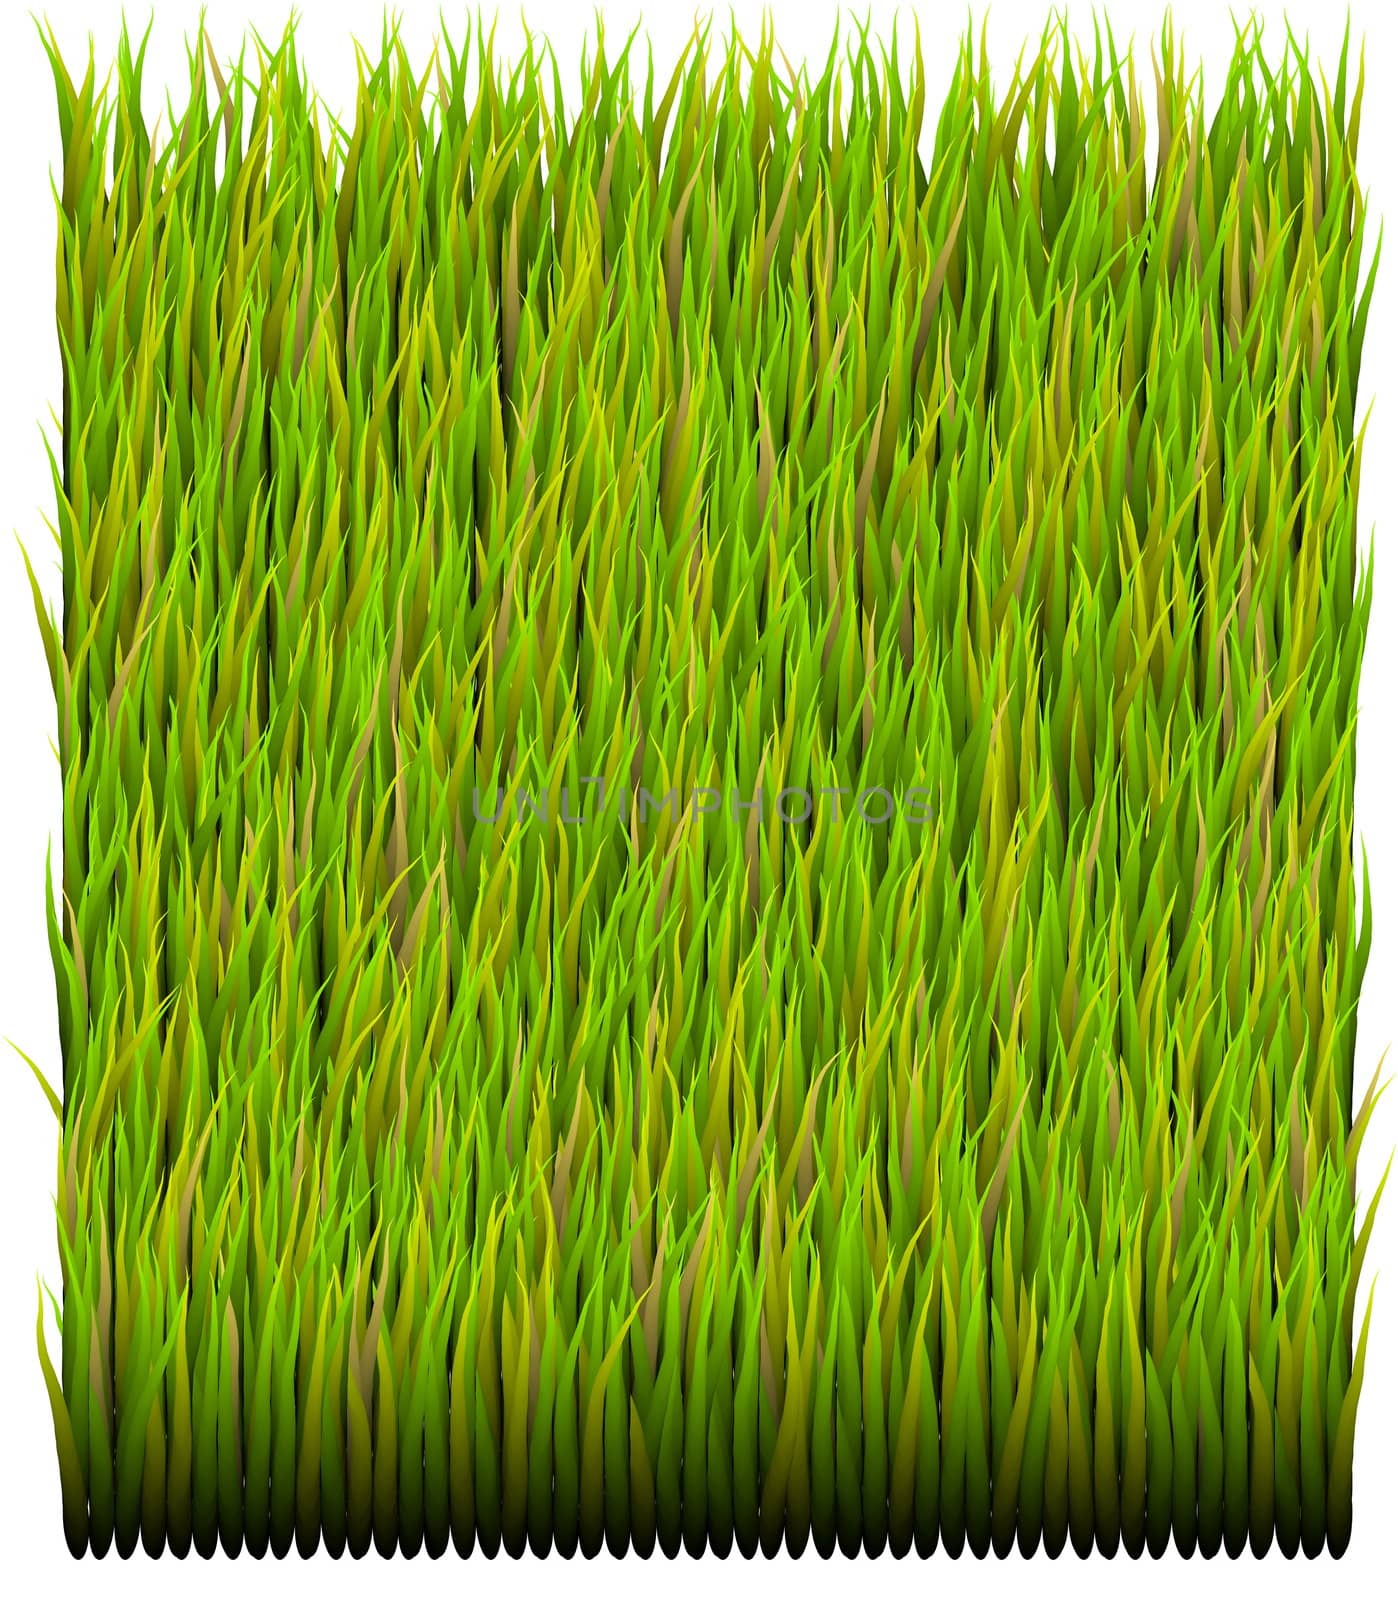 Green Grass Patch Abstract Background Pattern Texture